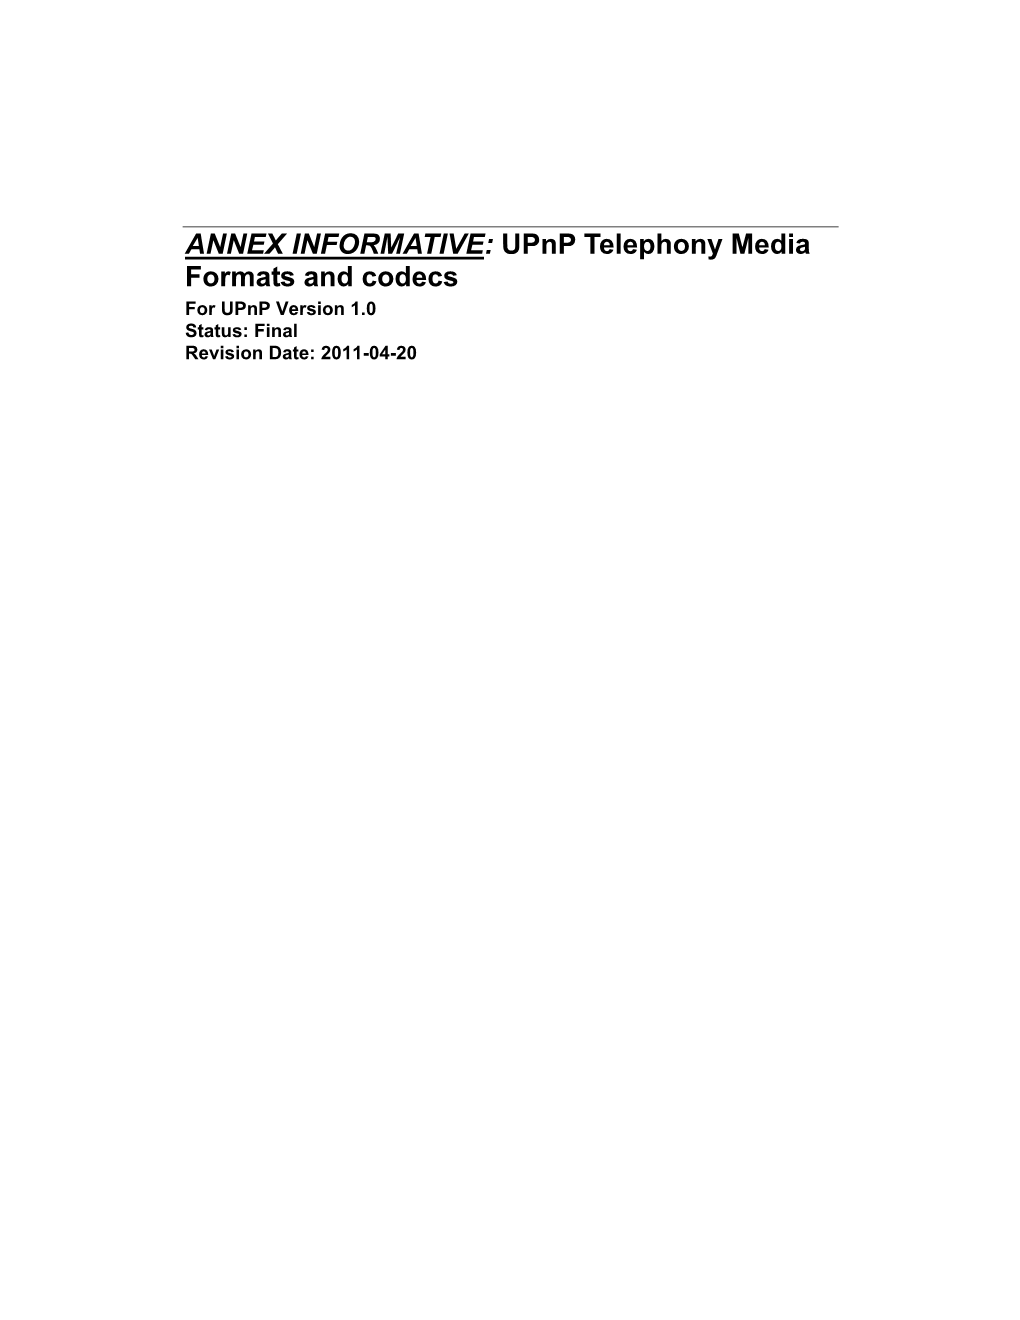 ANNEX INFORMATIVE: Upnp Telephony Media Formats and Codecs for Upnp Version 1.0 Status: Final Revision Date: 2011-04-20